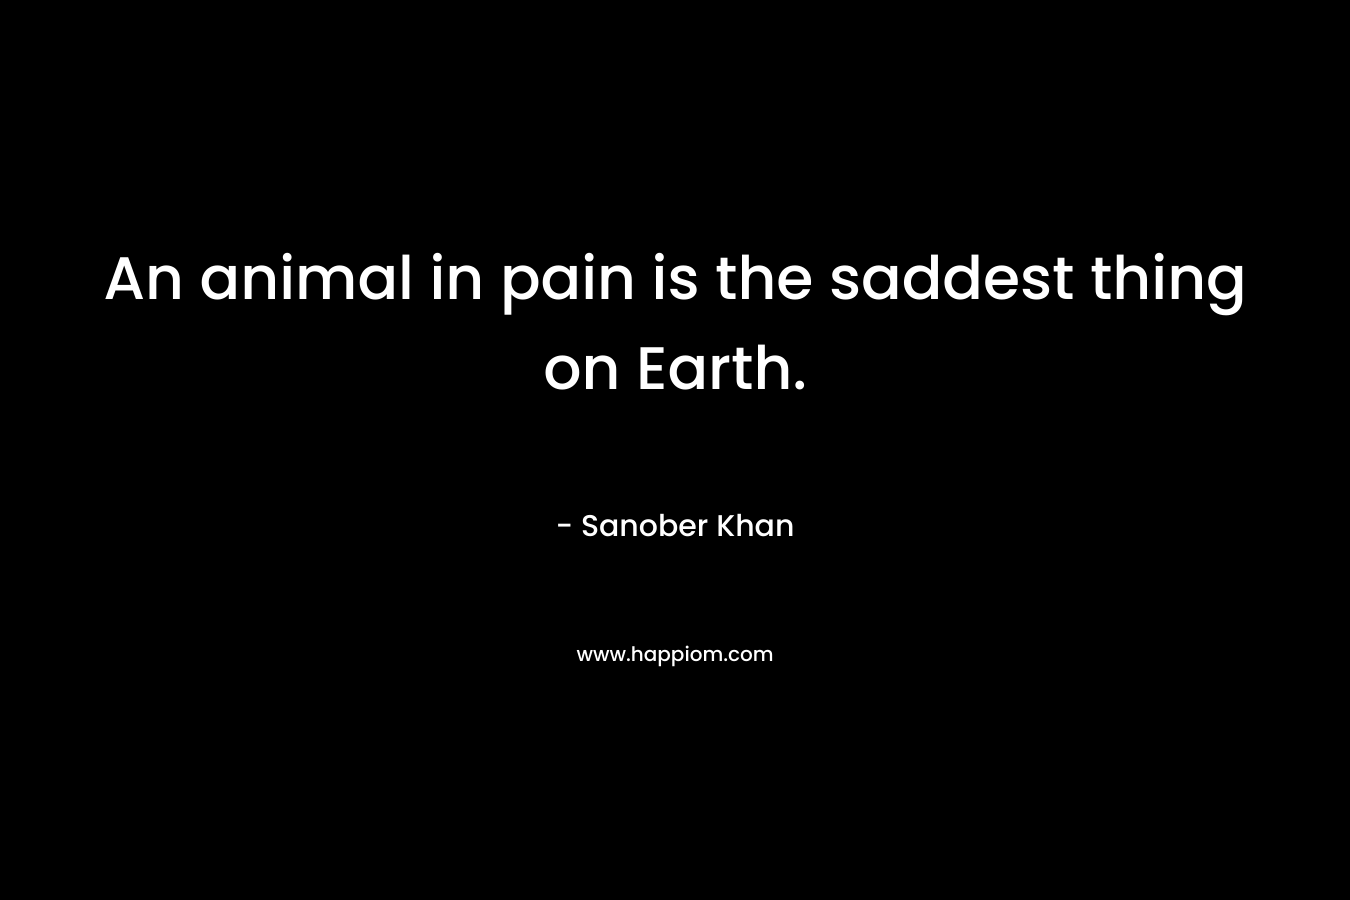 An animal in pain is the saddest thing on Earth.